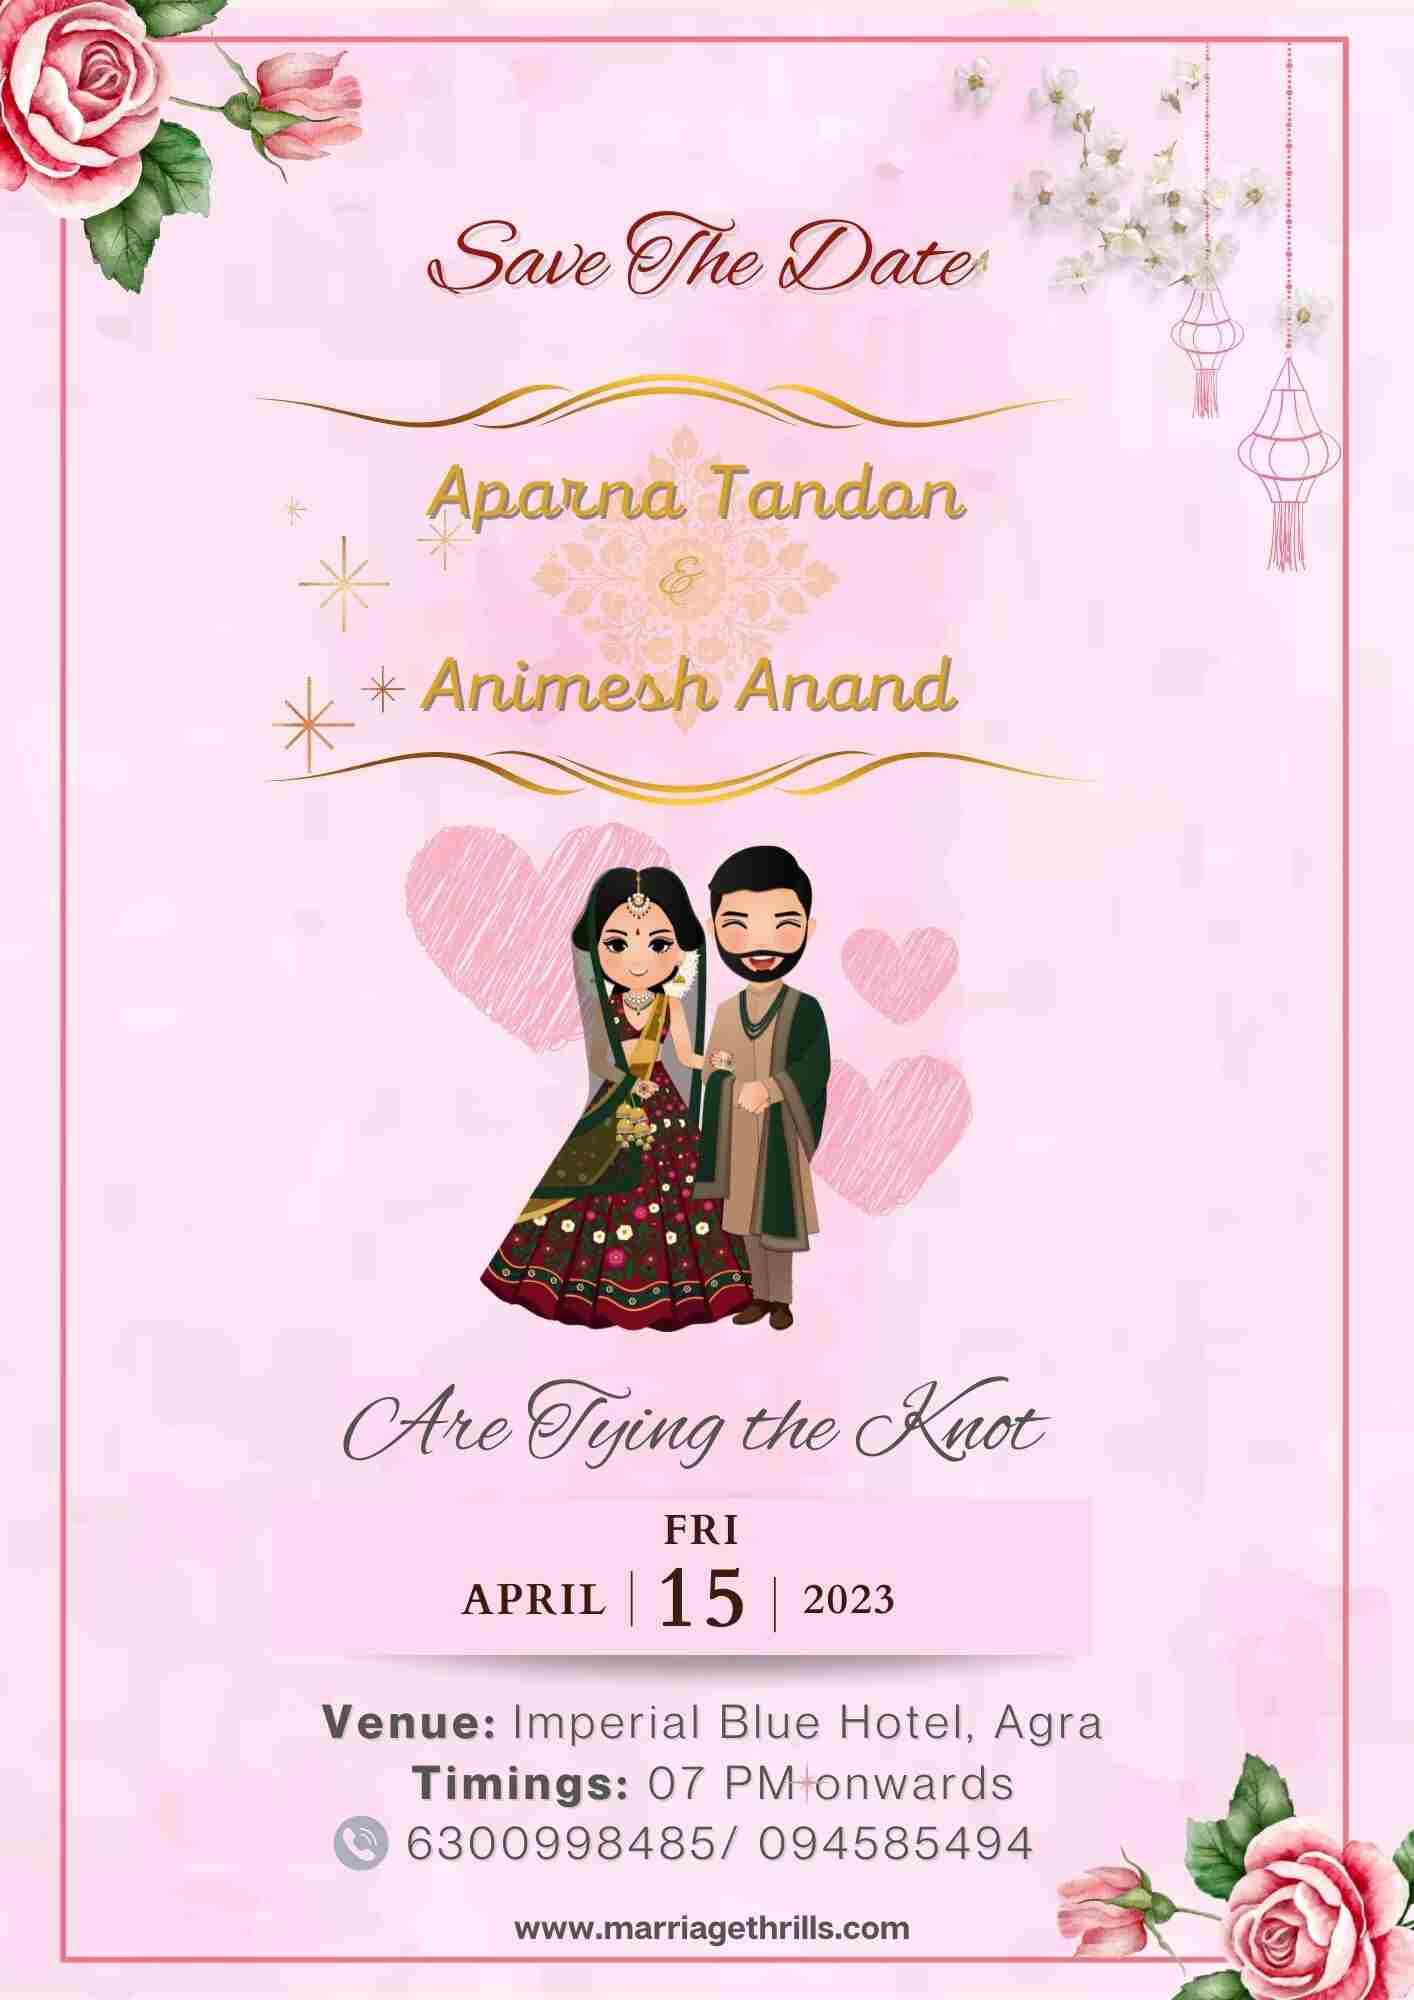 Save The Date Beautiful Template - Marriage Thrills